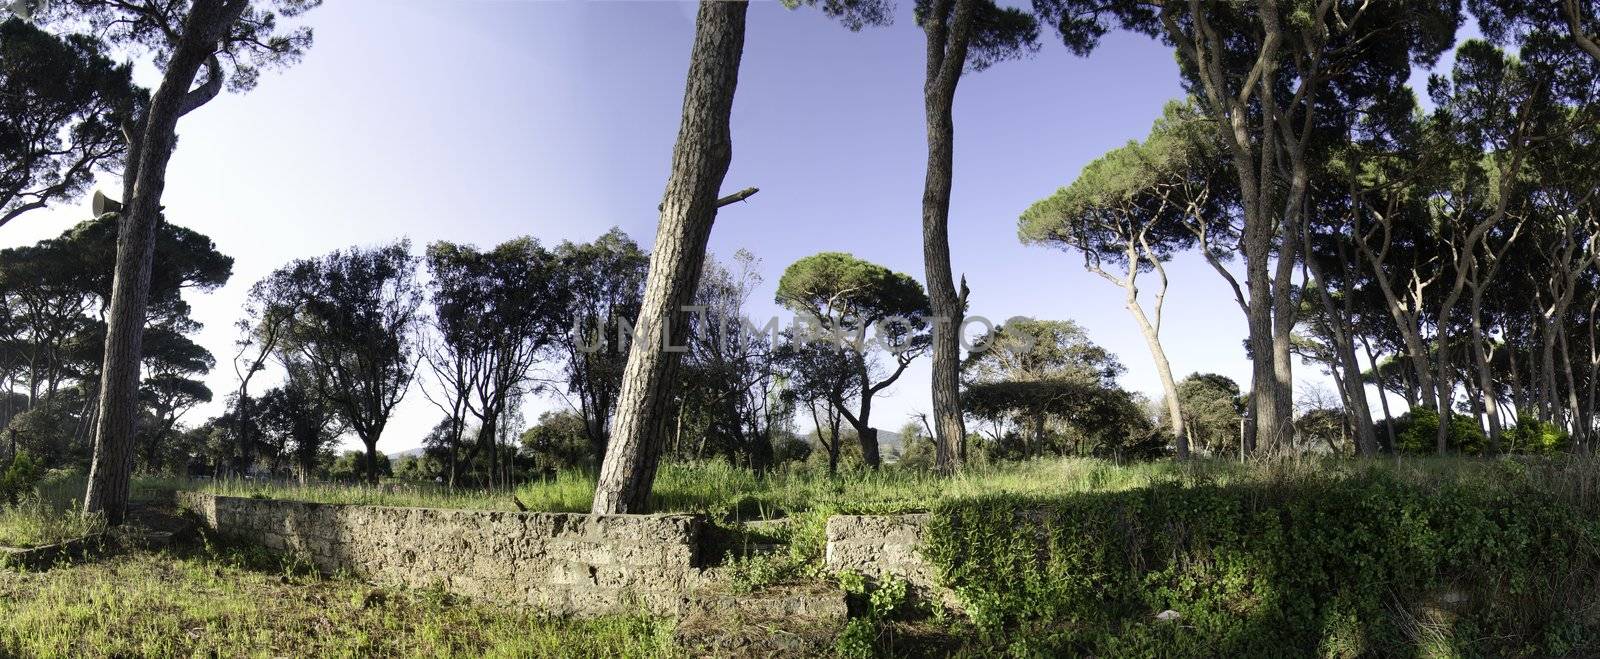 Pines in a Tuscan Pinewood near Follonica, Italy